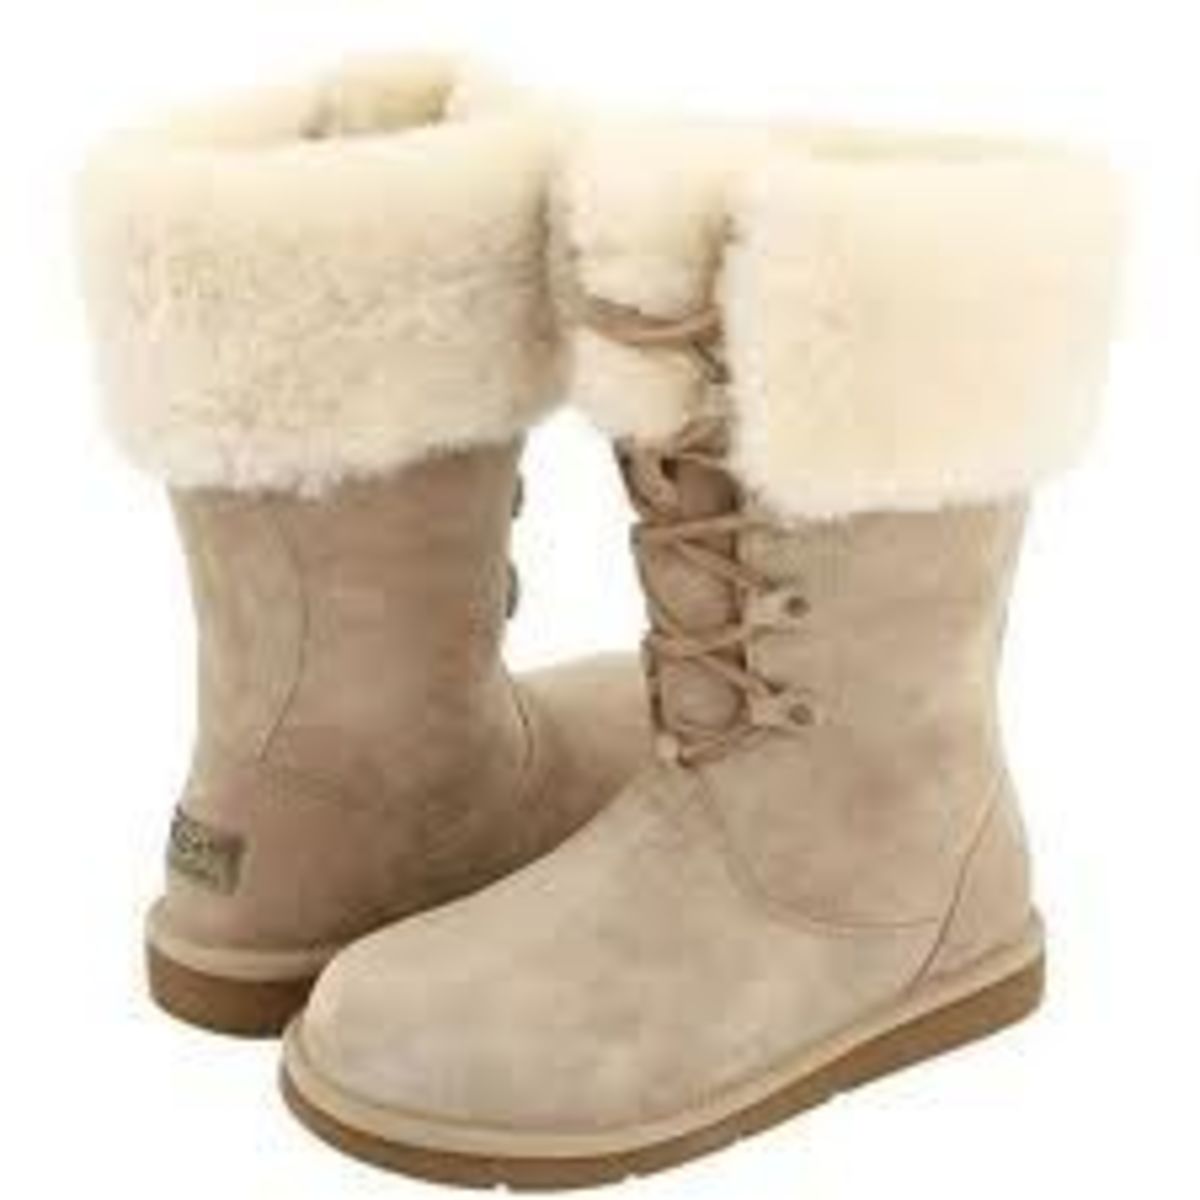 how do you clean uggs without ruining them